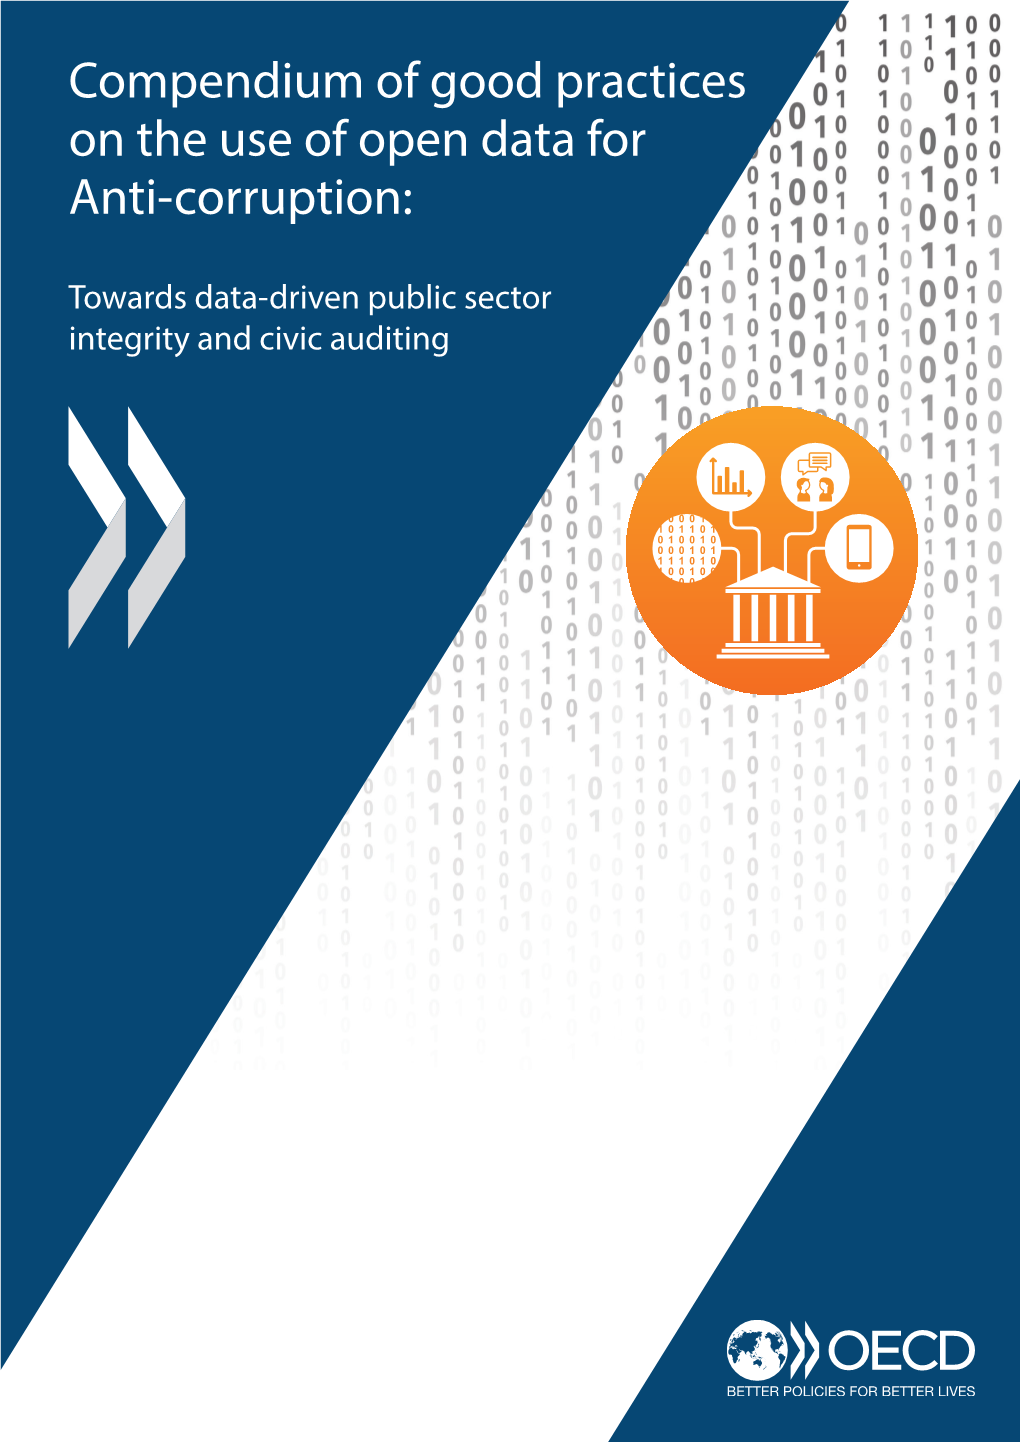 Compendium of Good Practices on the Use of Open Data for Anti-Corruption